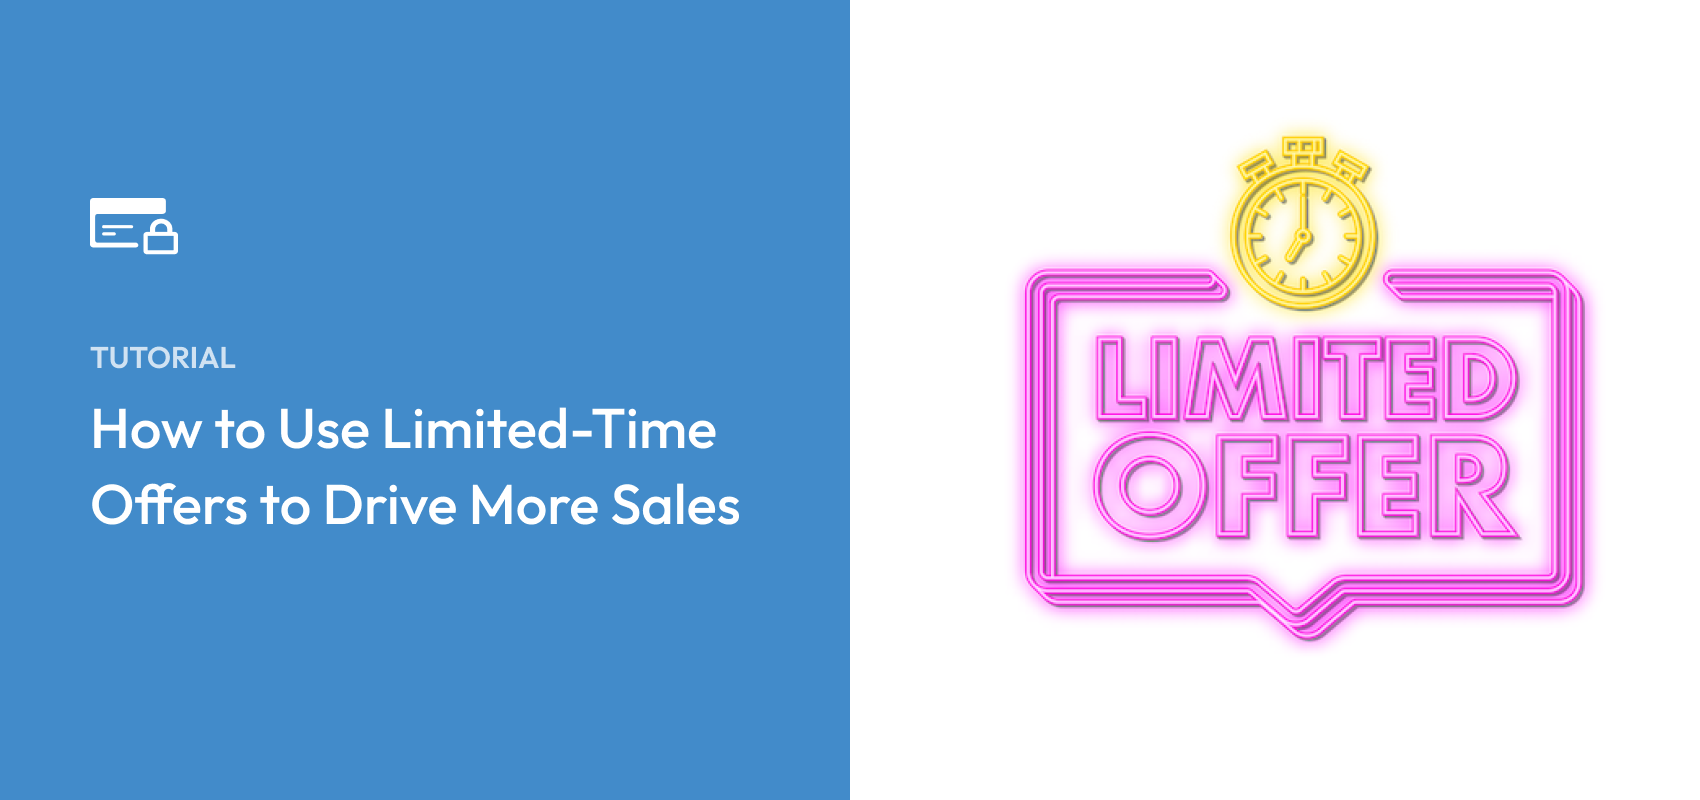 How to Craft an Effective Limited Time Offer